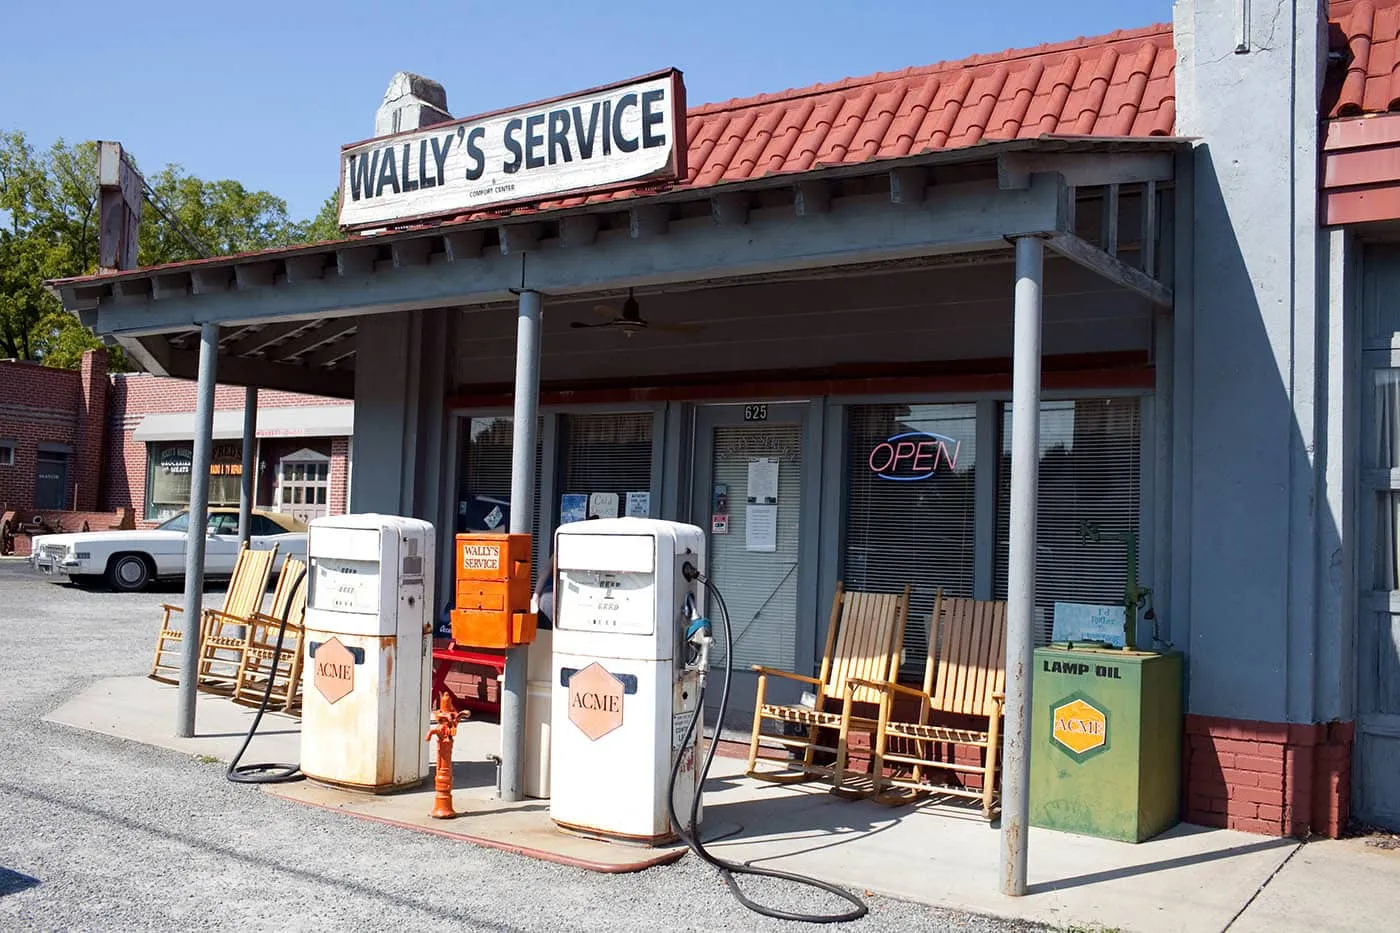 Wally's Service in Mount Airy, North Carolina - Home of Mayberry and Andy Griffith